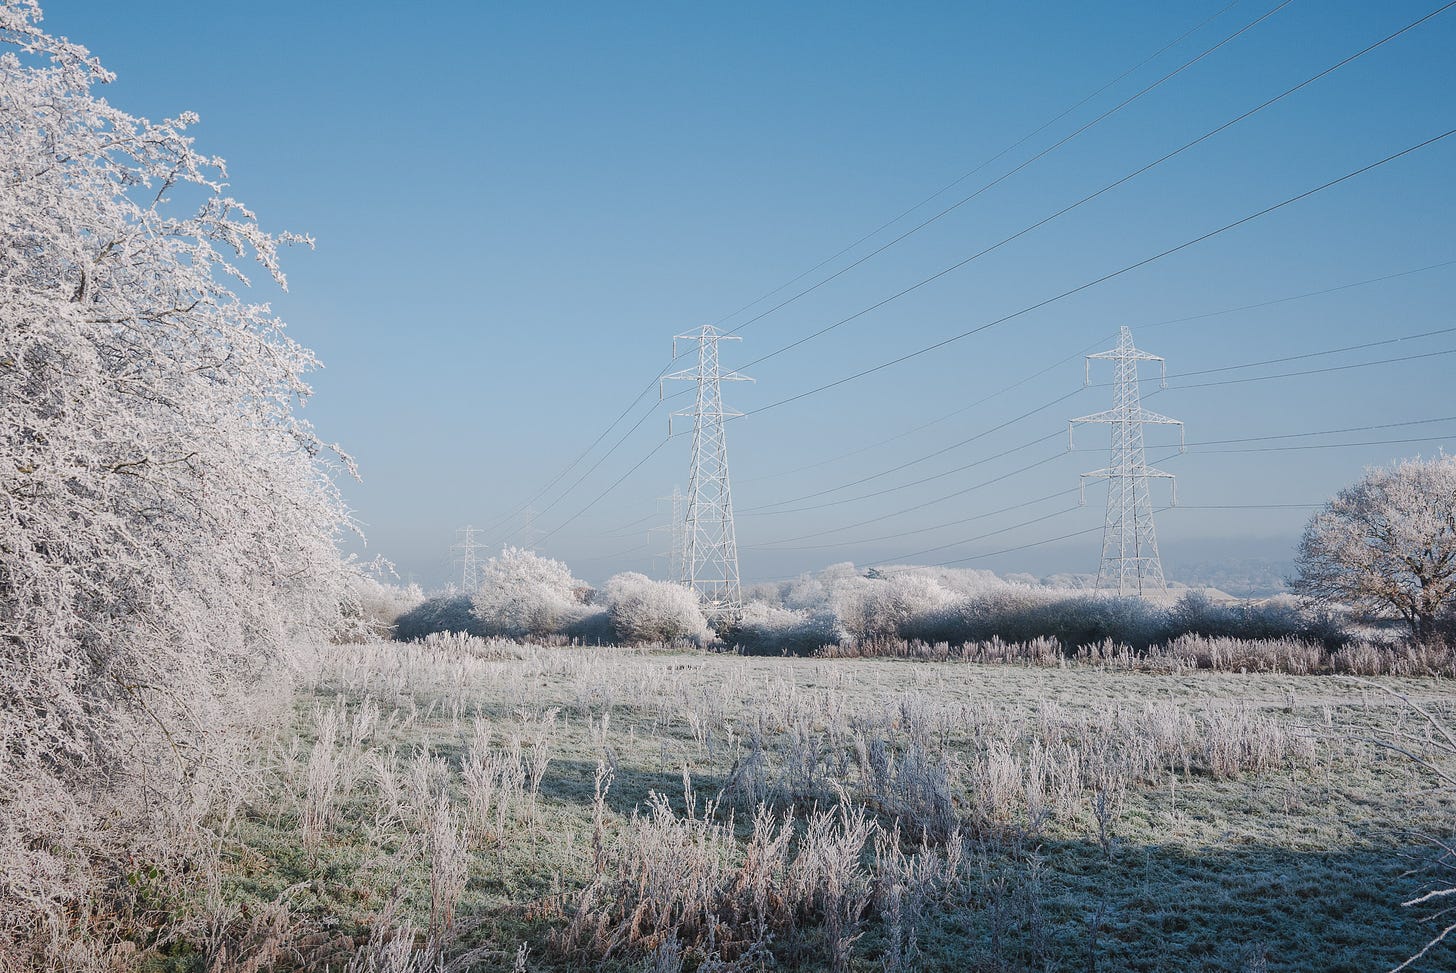 A frosty field where the trees around the edges are covered in white frost and the powerline pylons are also white and frosty.